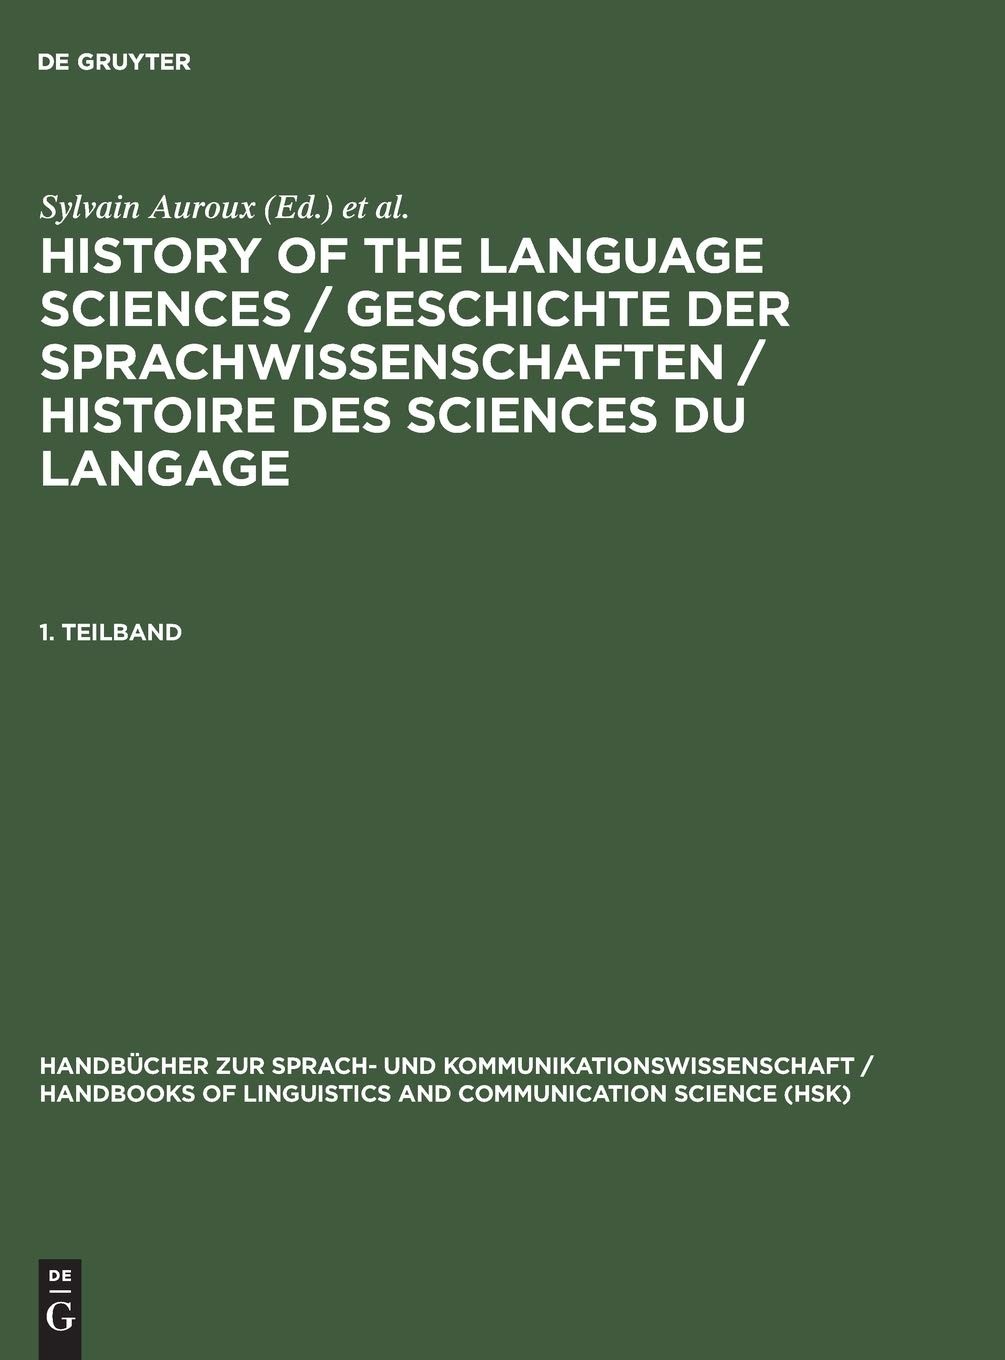 History of the language sciences